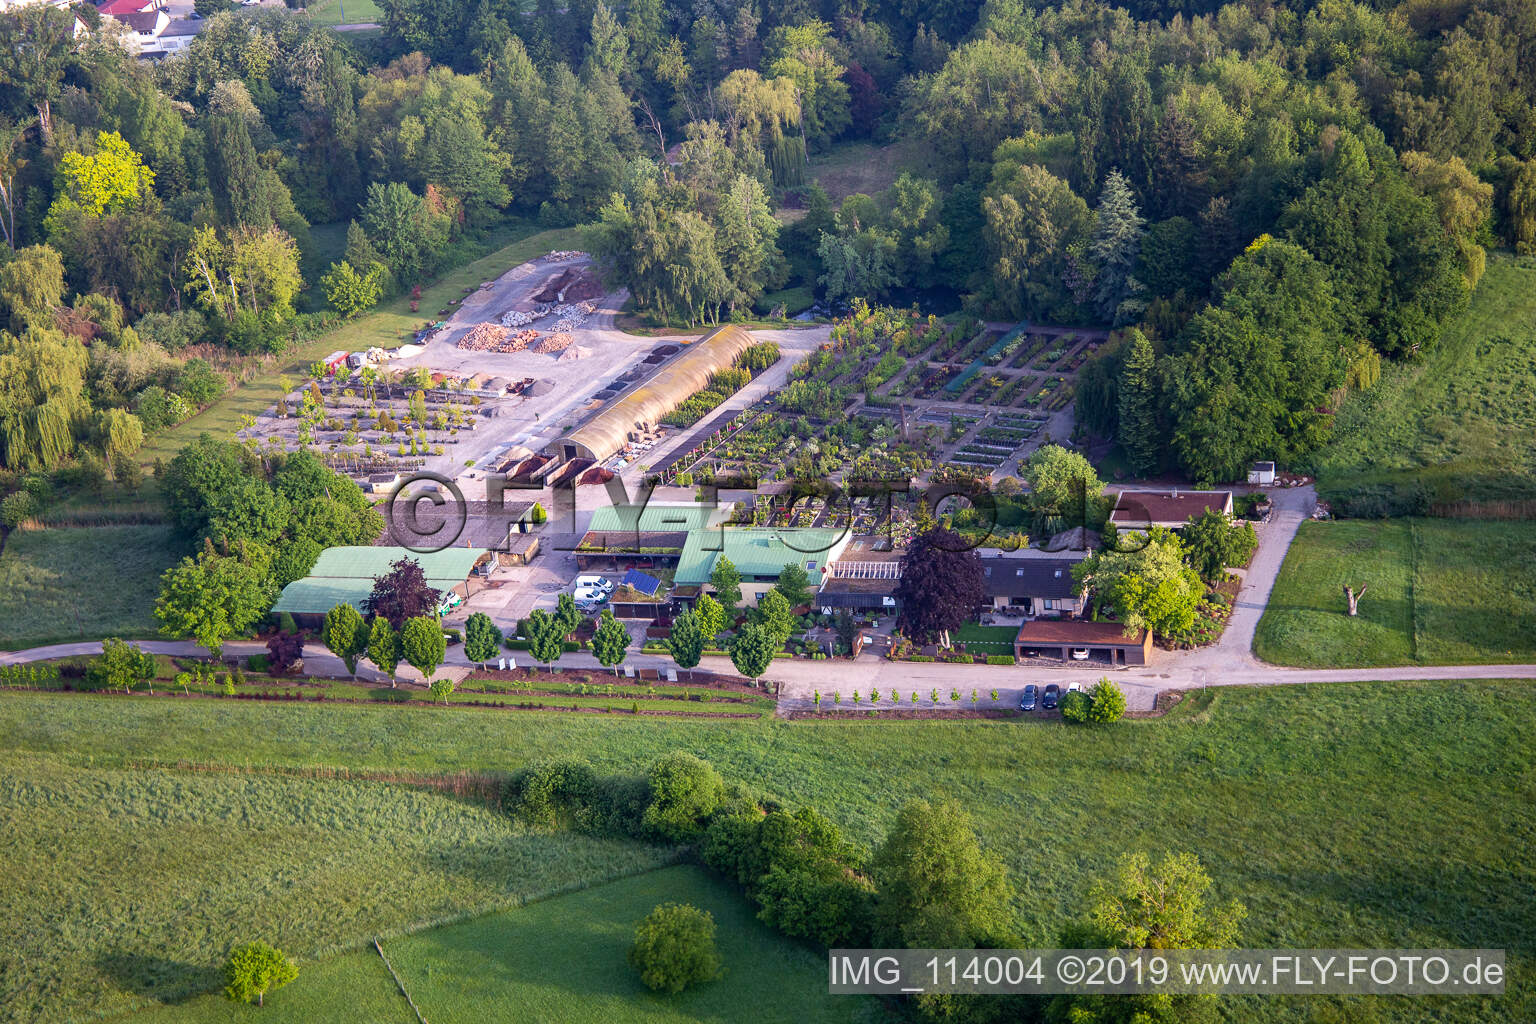 Oblique view of Bienwald tree nursery / Greentec in Berg in the state Rhineland-Palatinate, Germany